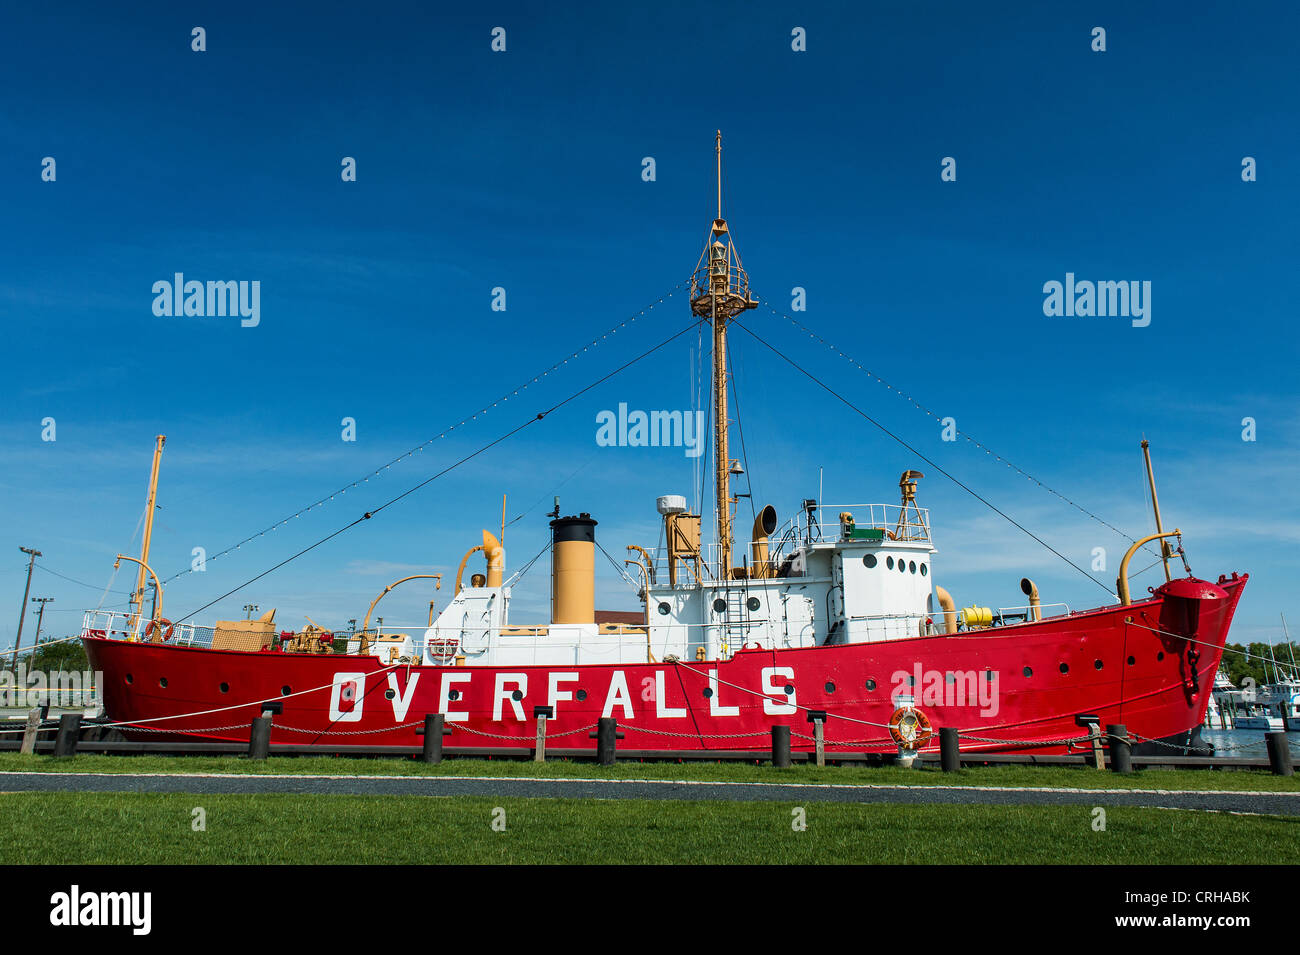 Lightship Black and White Stock Photos & Images - Alamy